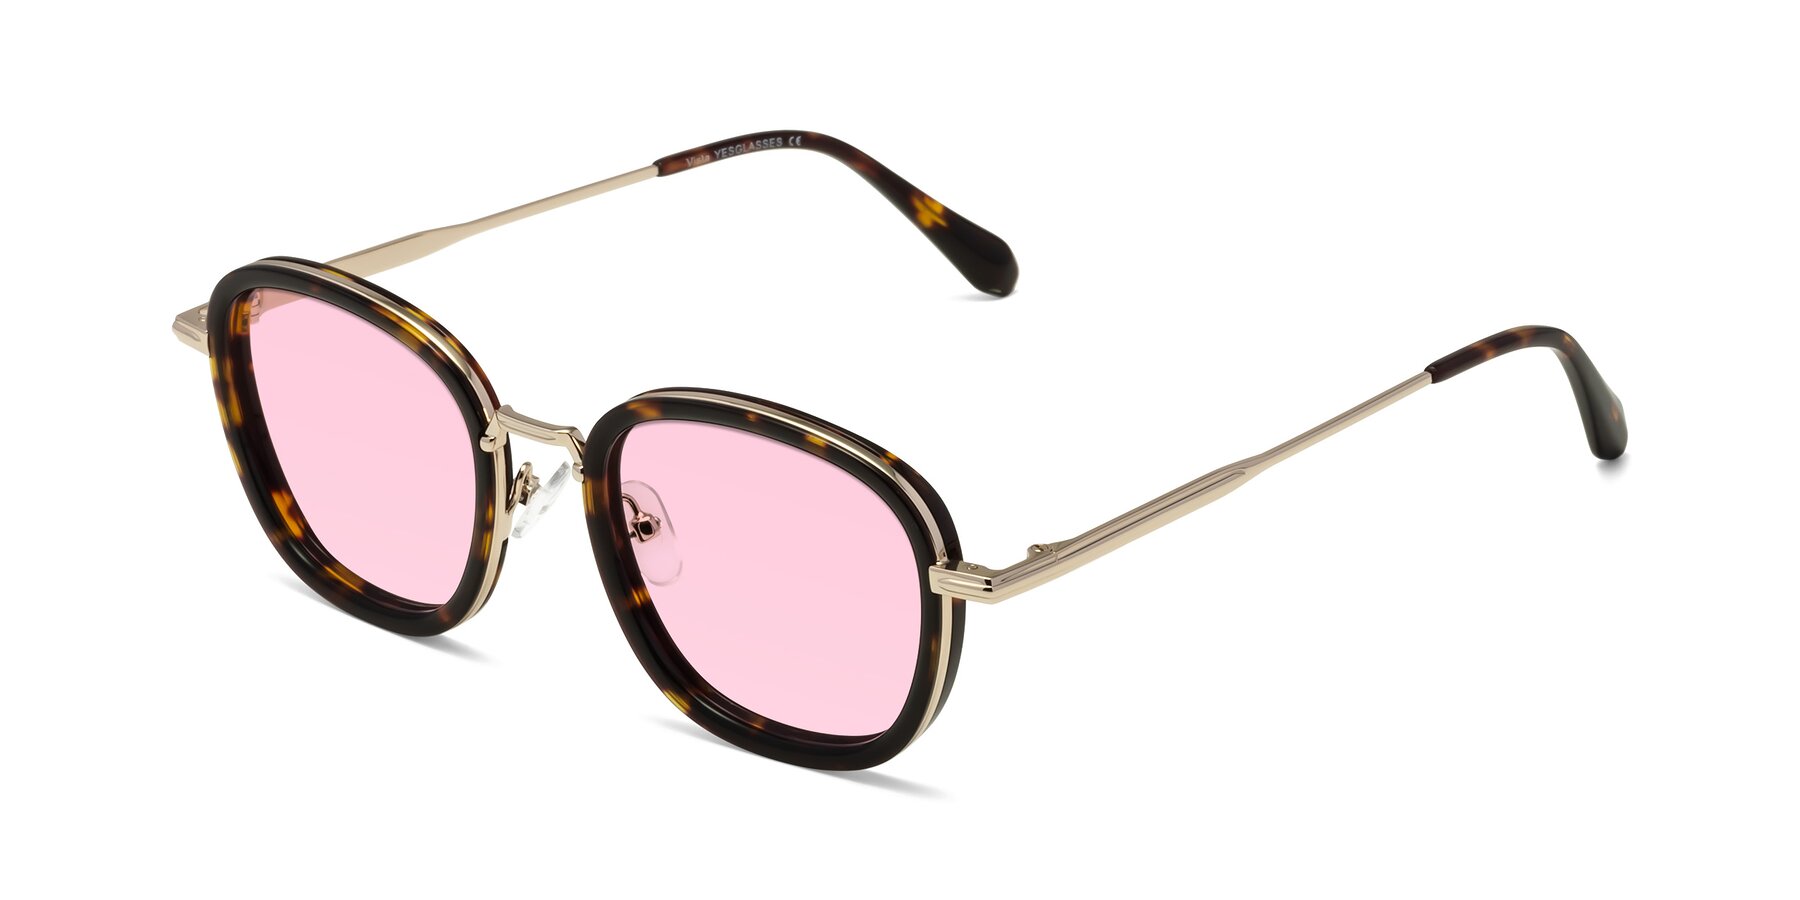 Angle of Vista in Tortoise-Light Gold with Light Pink Tinted Lenses